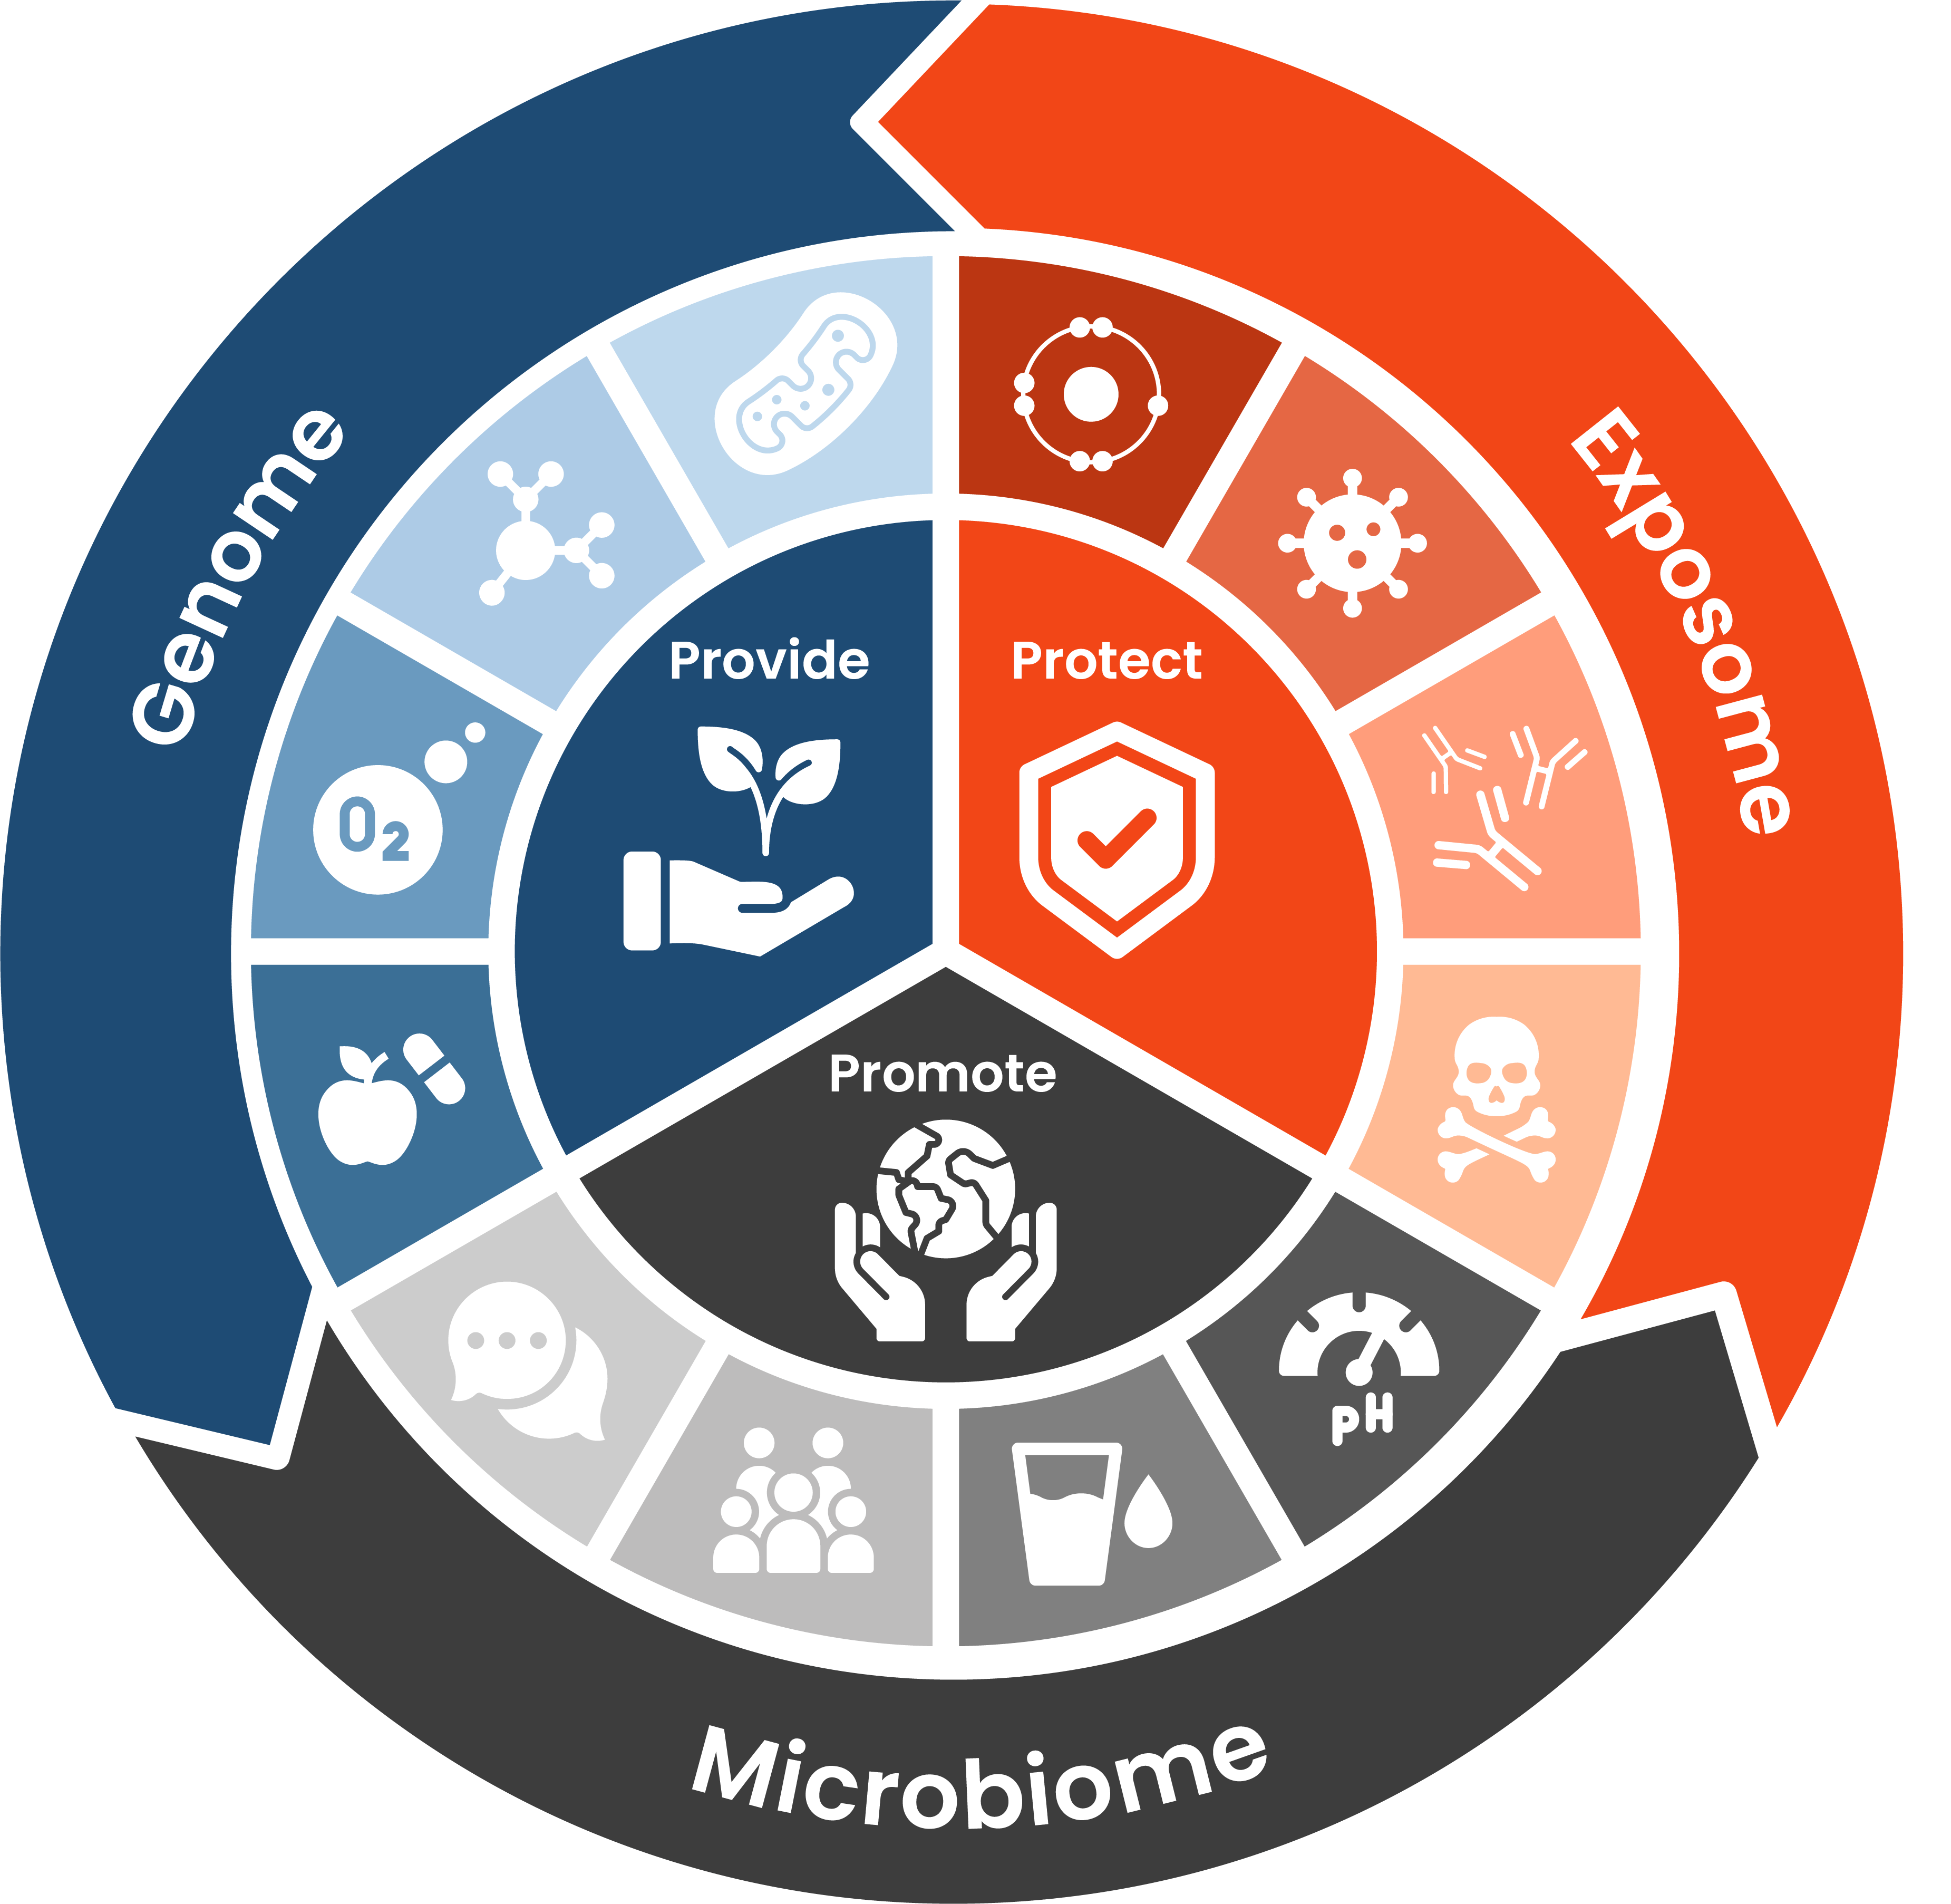 Circular diagram showing three equally-weighted parts of the Cell Blueprint: Genome, Exposome, and Microbiome. The genome section is broken down into various icons and falls into the Provide category. The exposome section is also broken down into various icons and falls into the protect section. Lastly, the mirobiome section is also broken down into various icons and falls into the promote section.